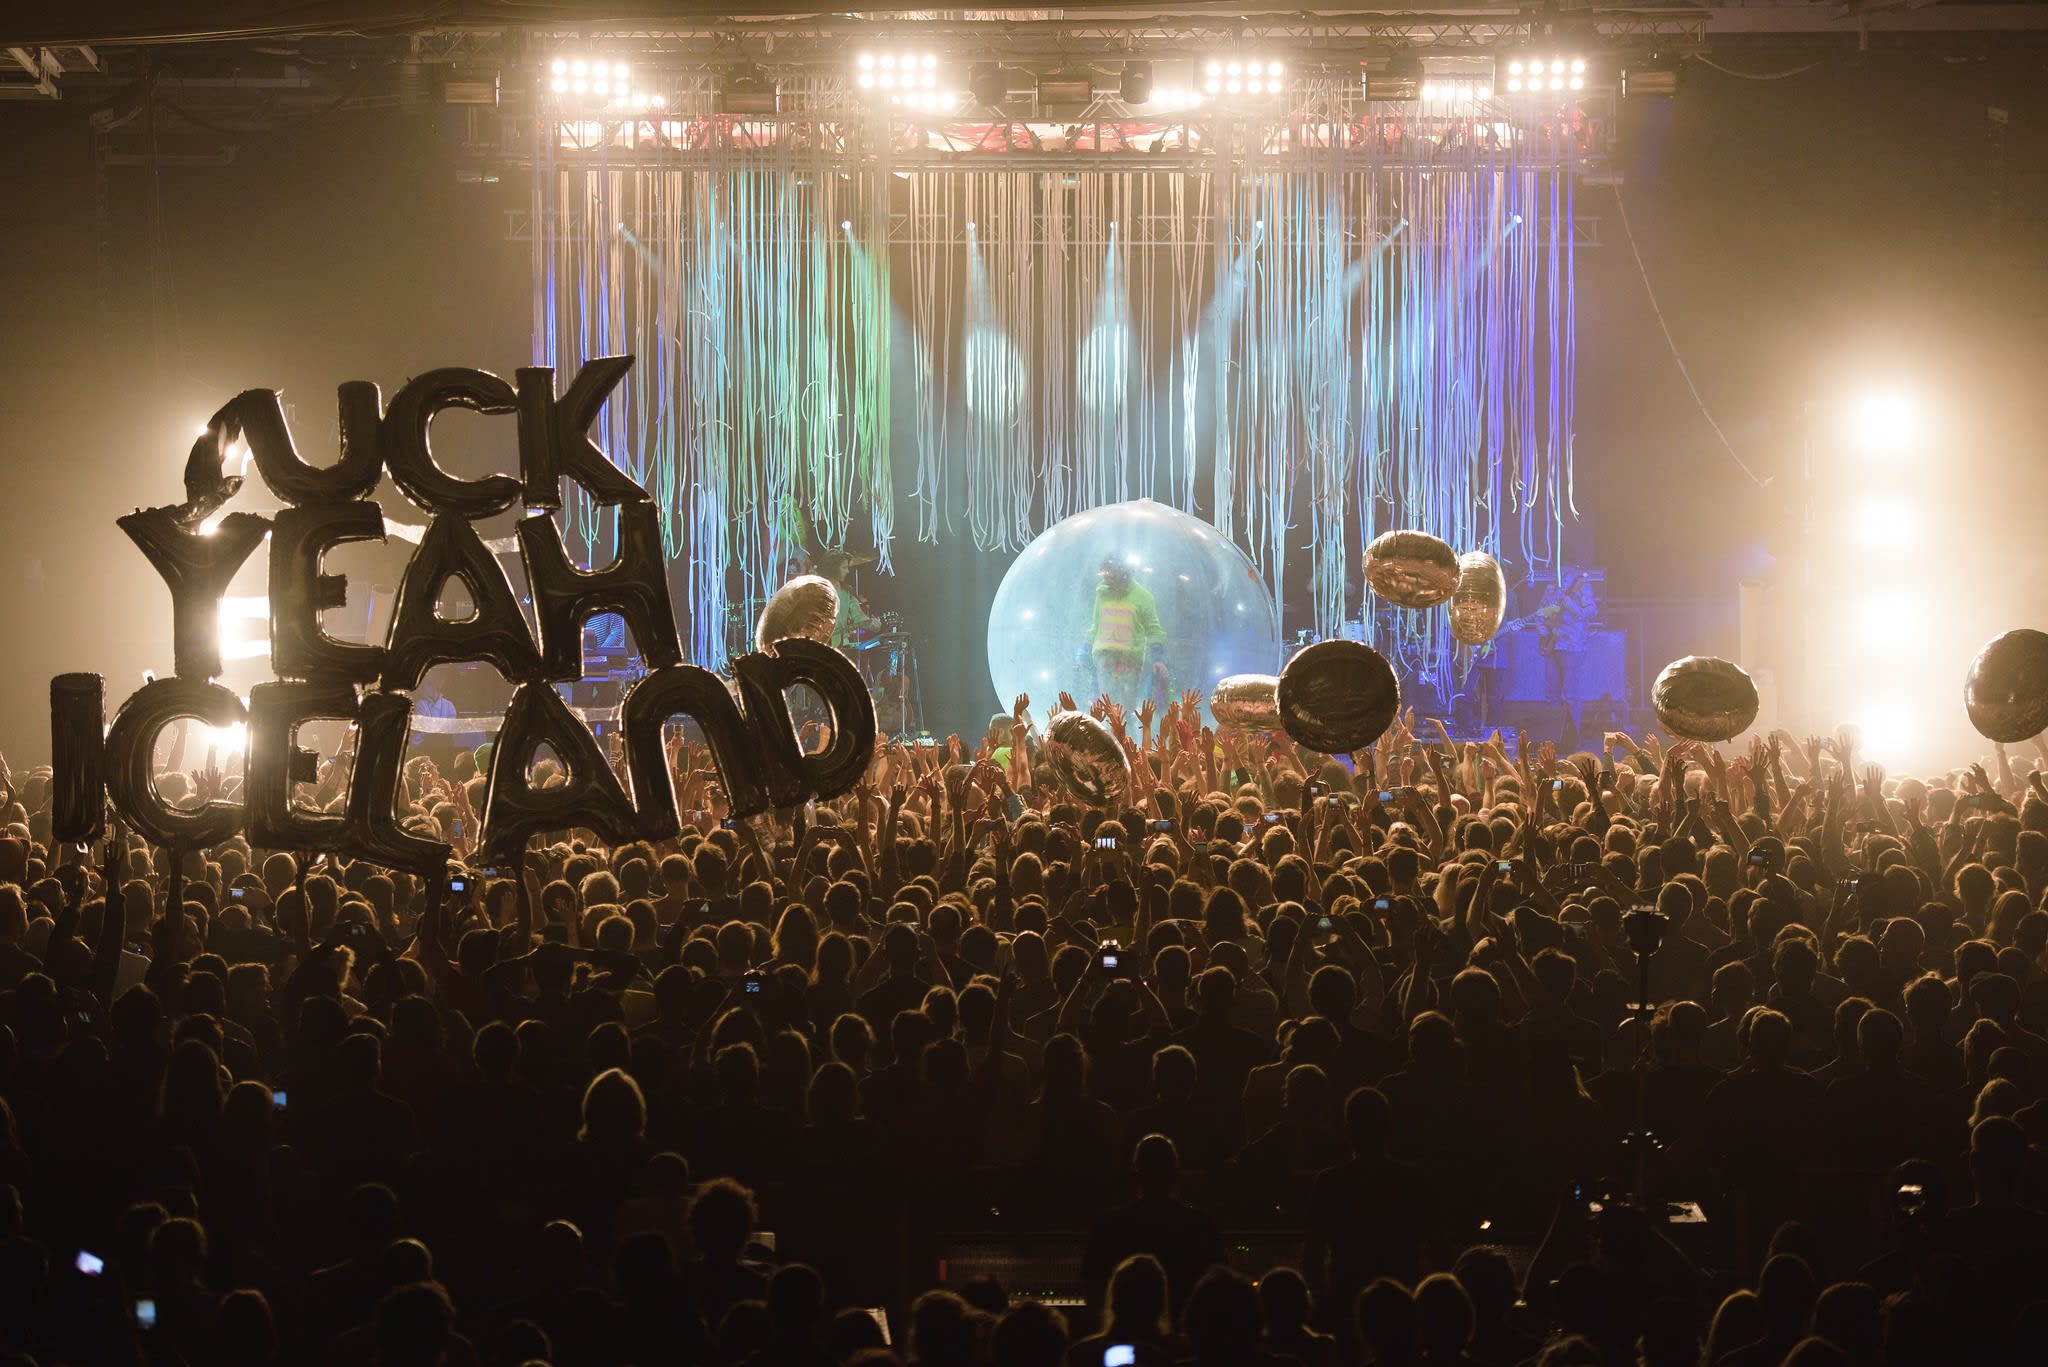 A packed audience watches The Flaming Lips perform onstage at Iceland Airwaves in 2014. An audience member holds a balloon which reads 'F*ck yeah Iceland'